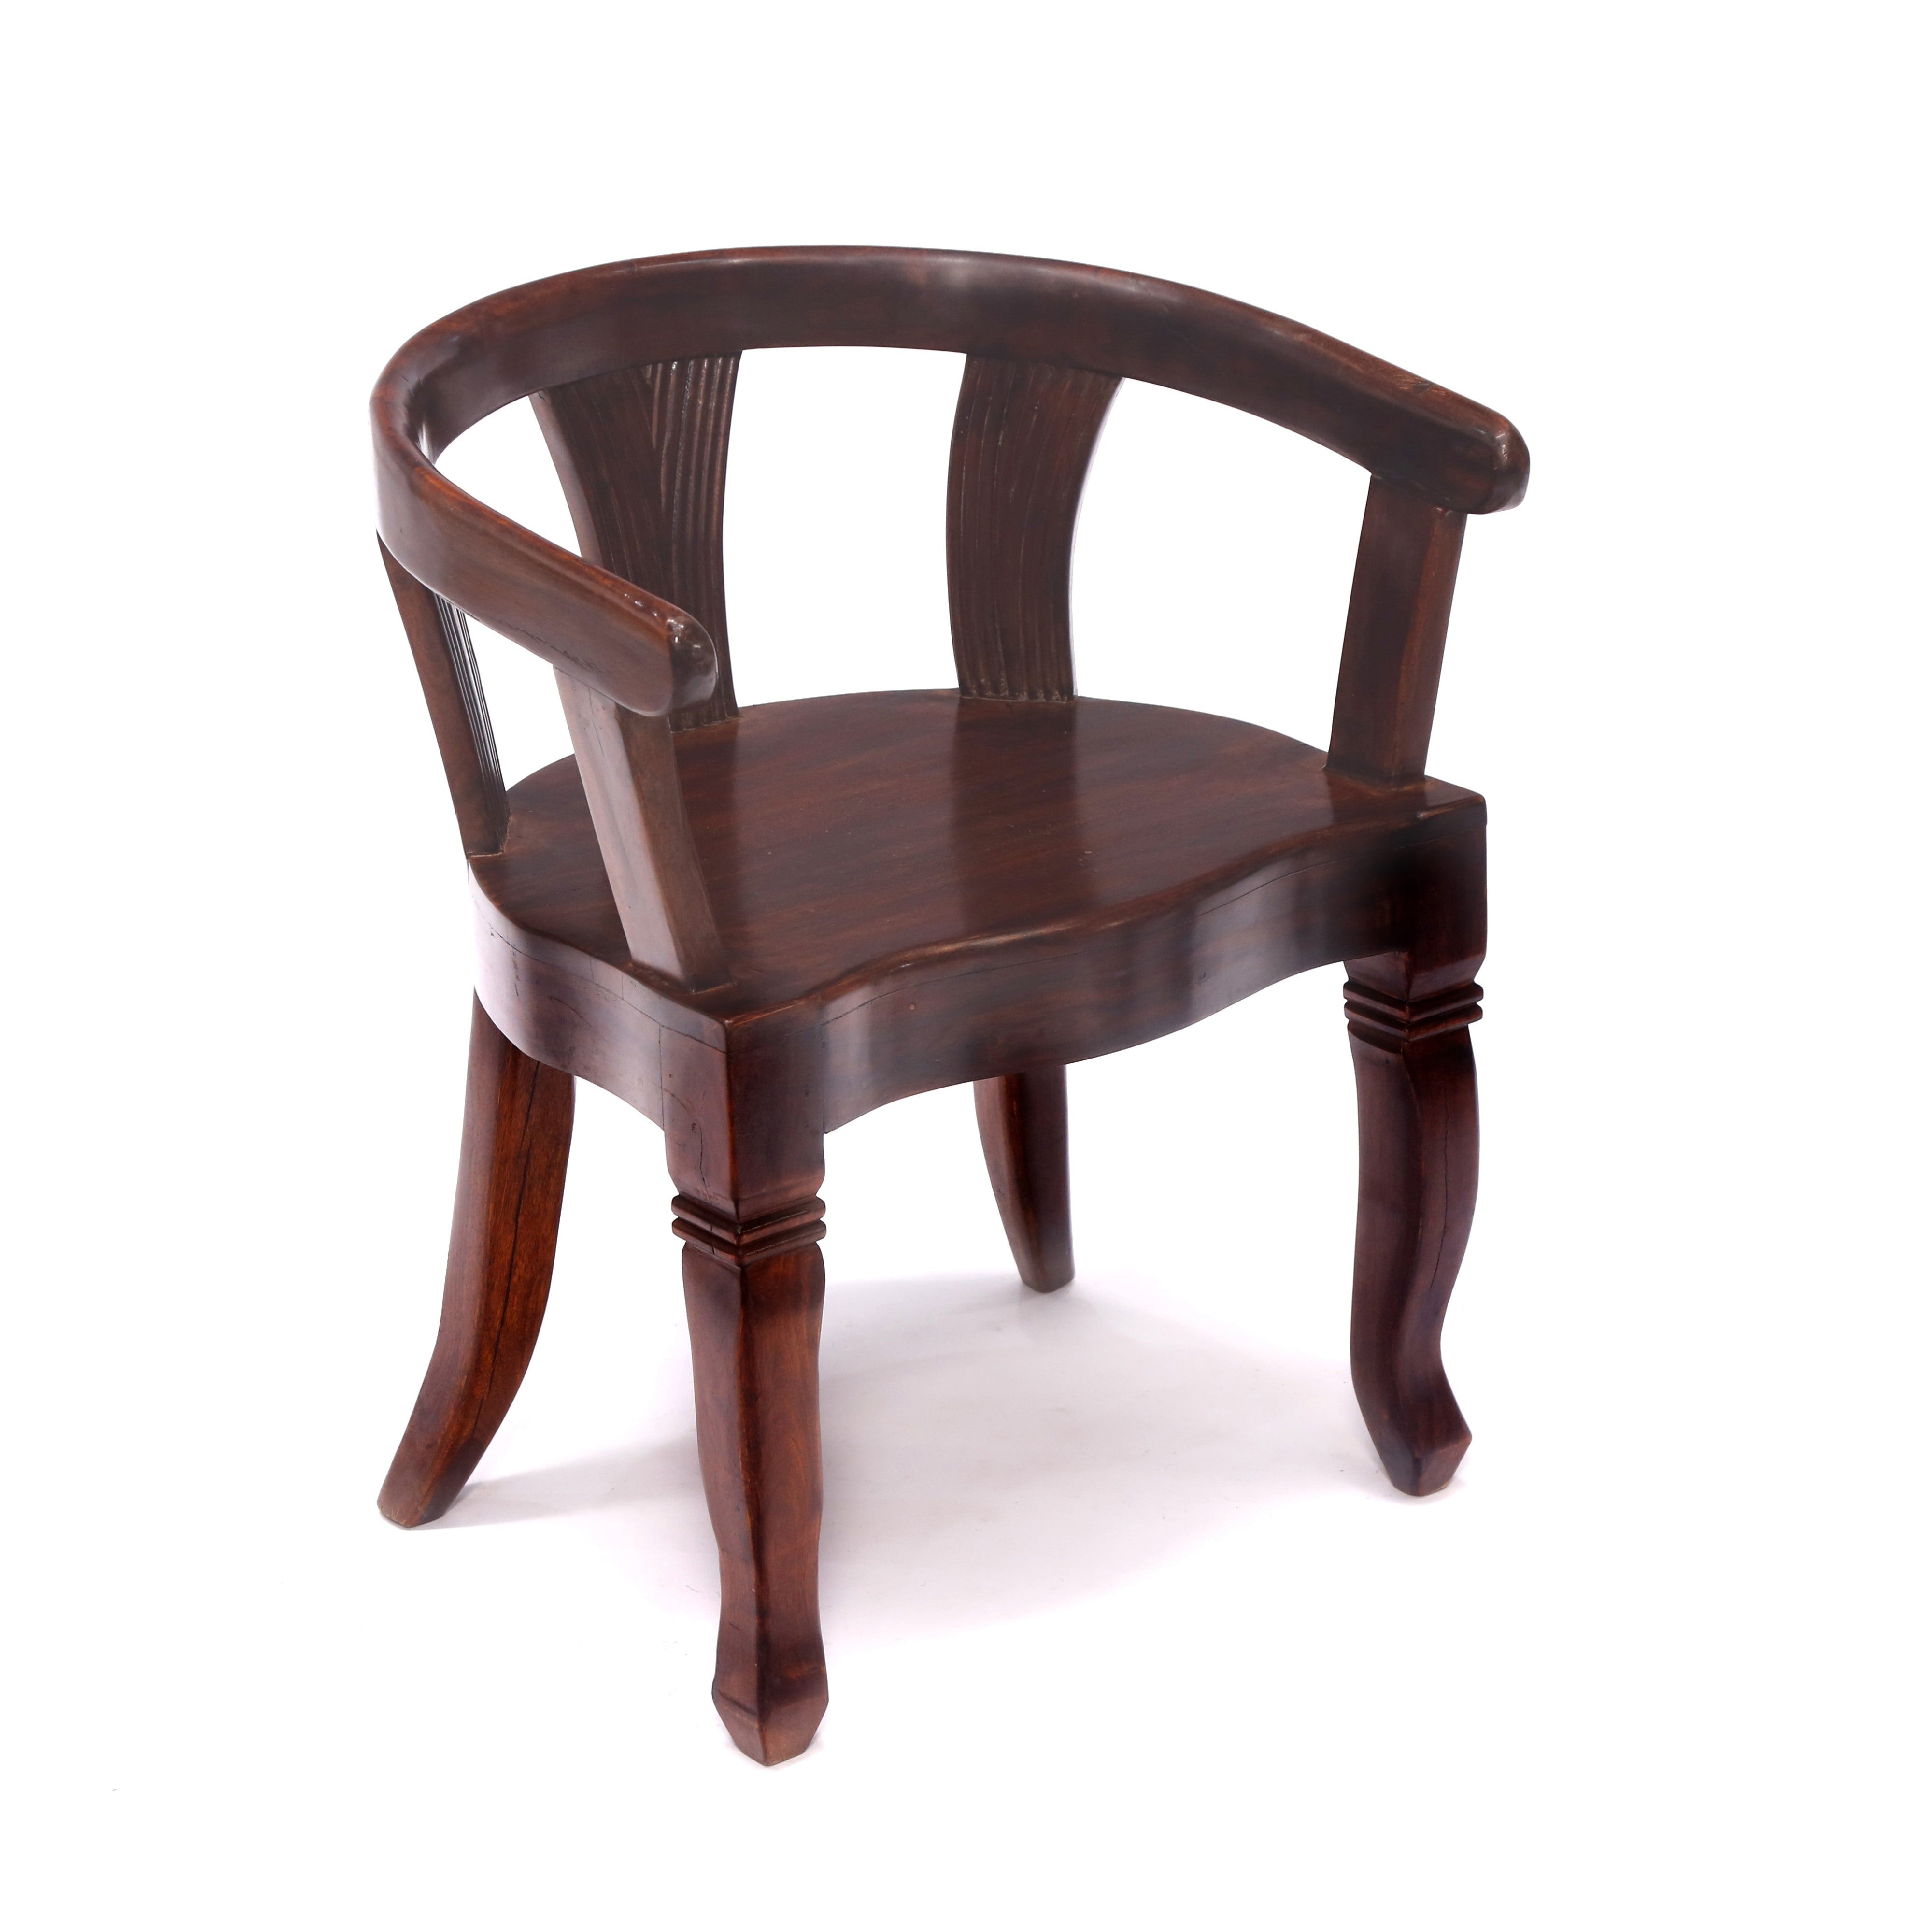 Solid Teak Dark Tone Rounded Arms Wooden Chair Arm Chair